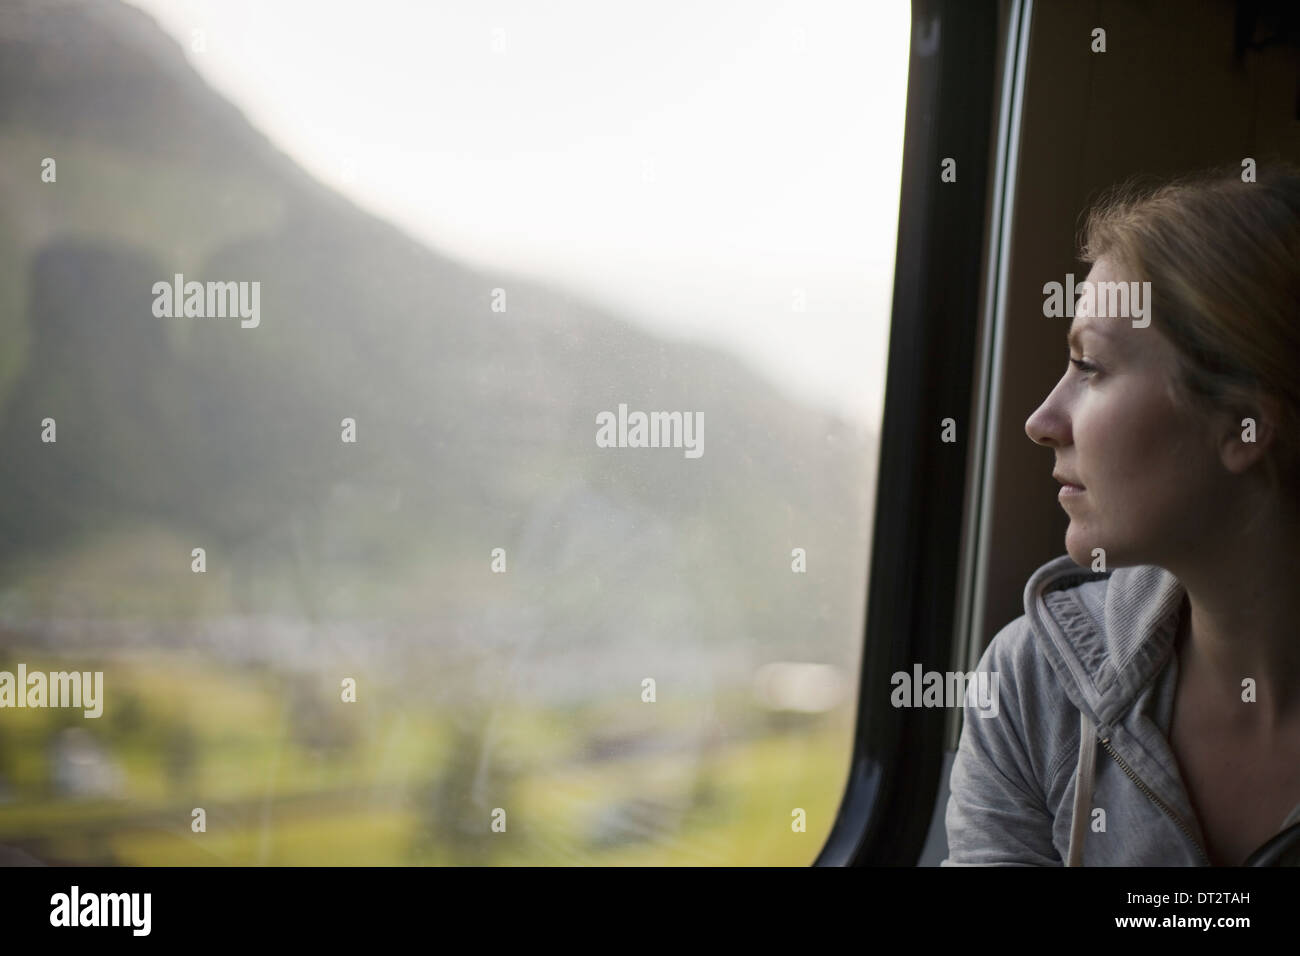 A woman sitting by a train window looking out at the landscape Stock Photo